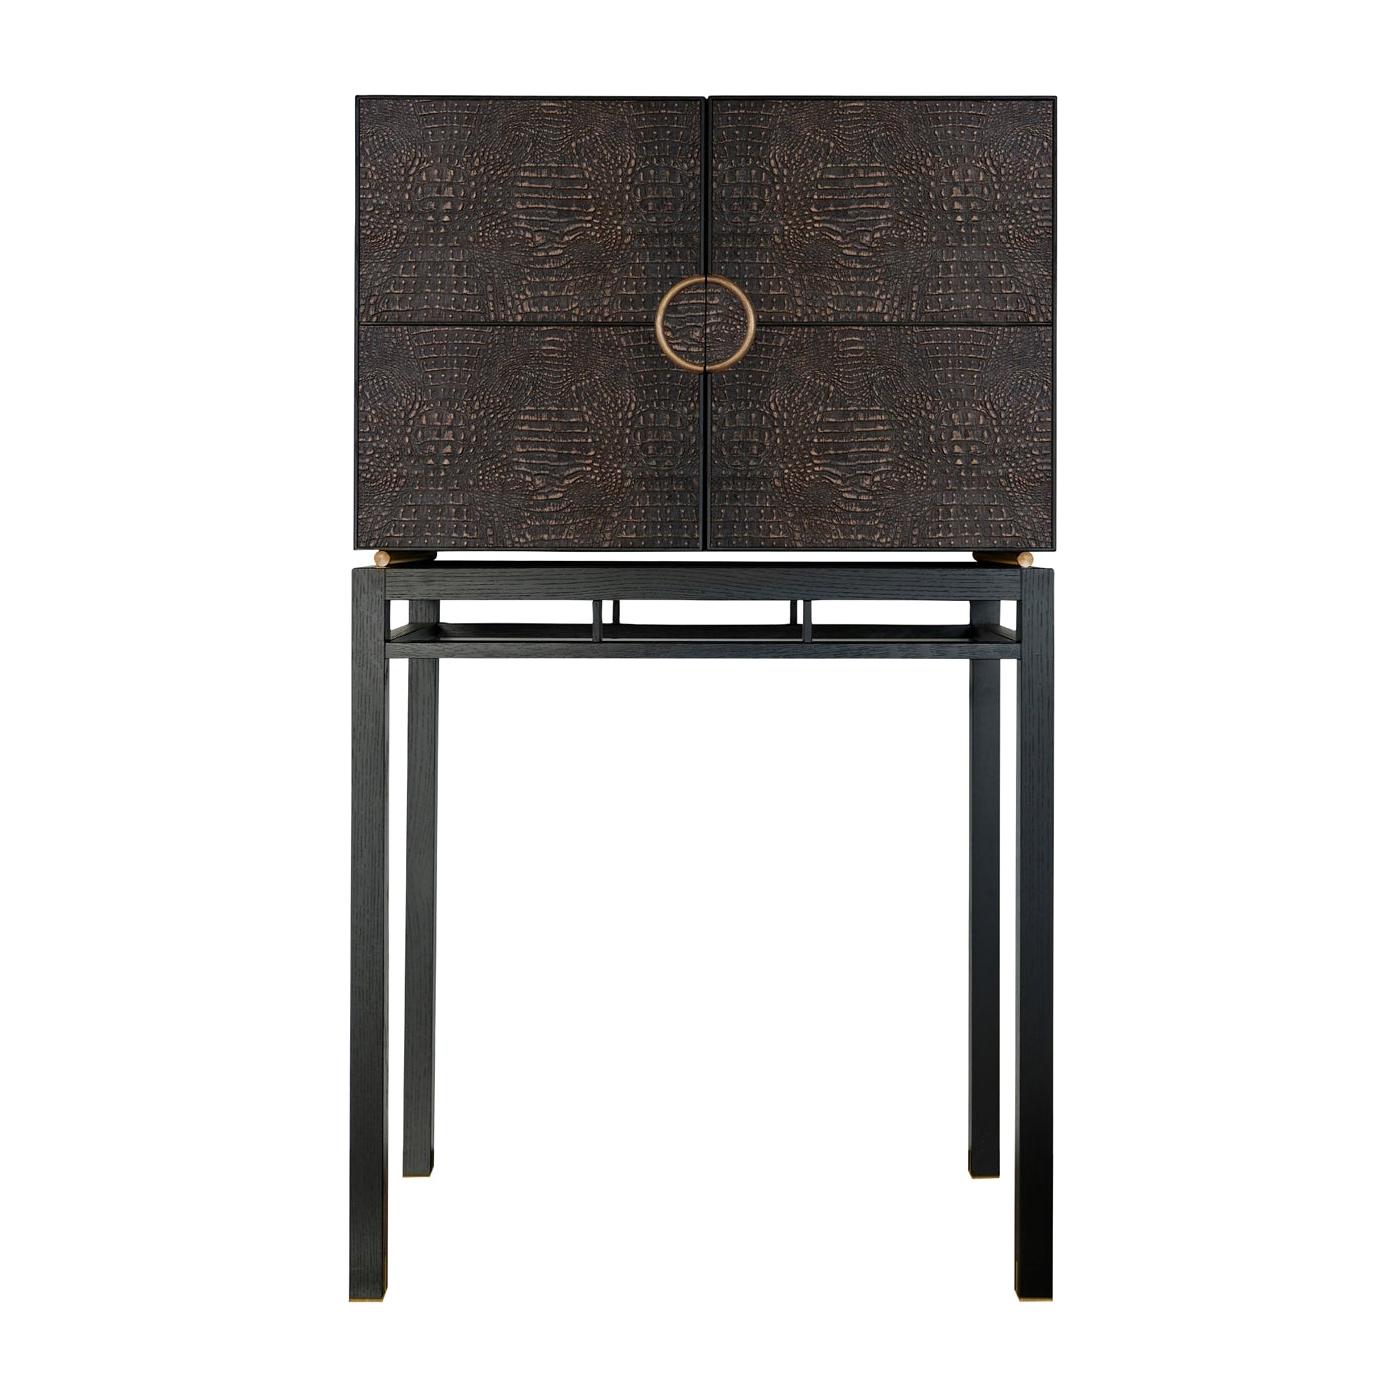 The Black Bar Cabinet For Sale